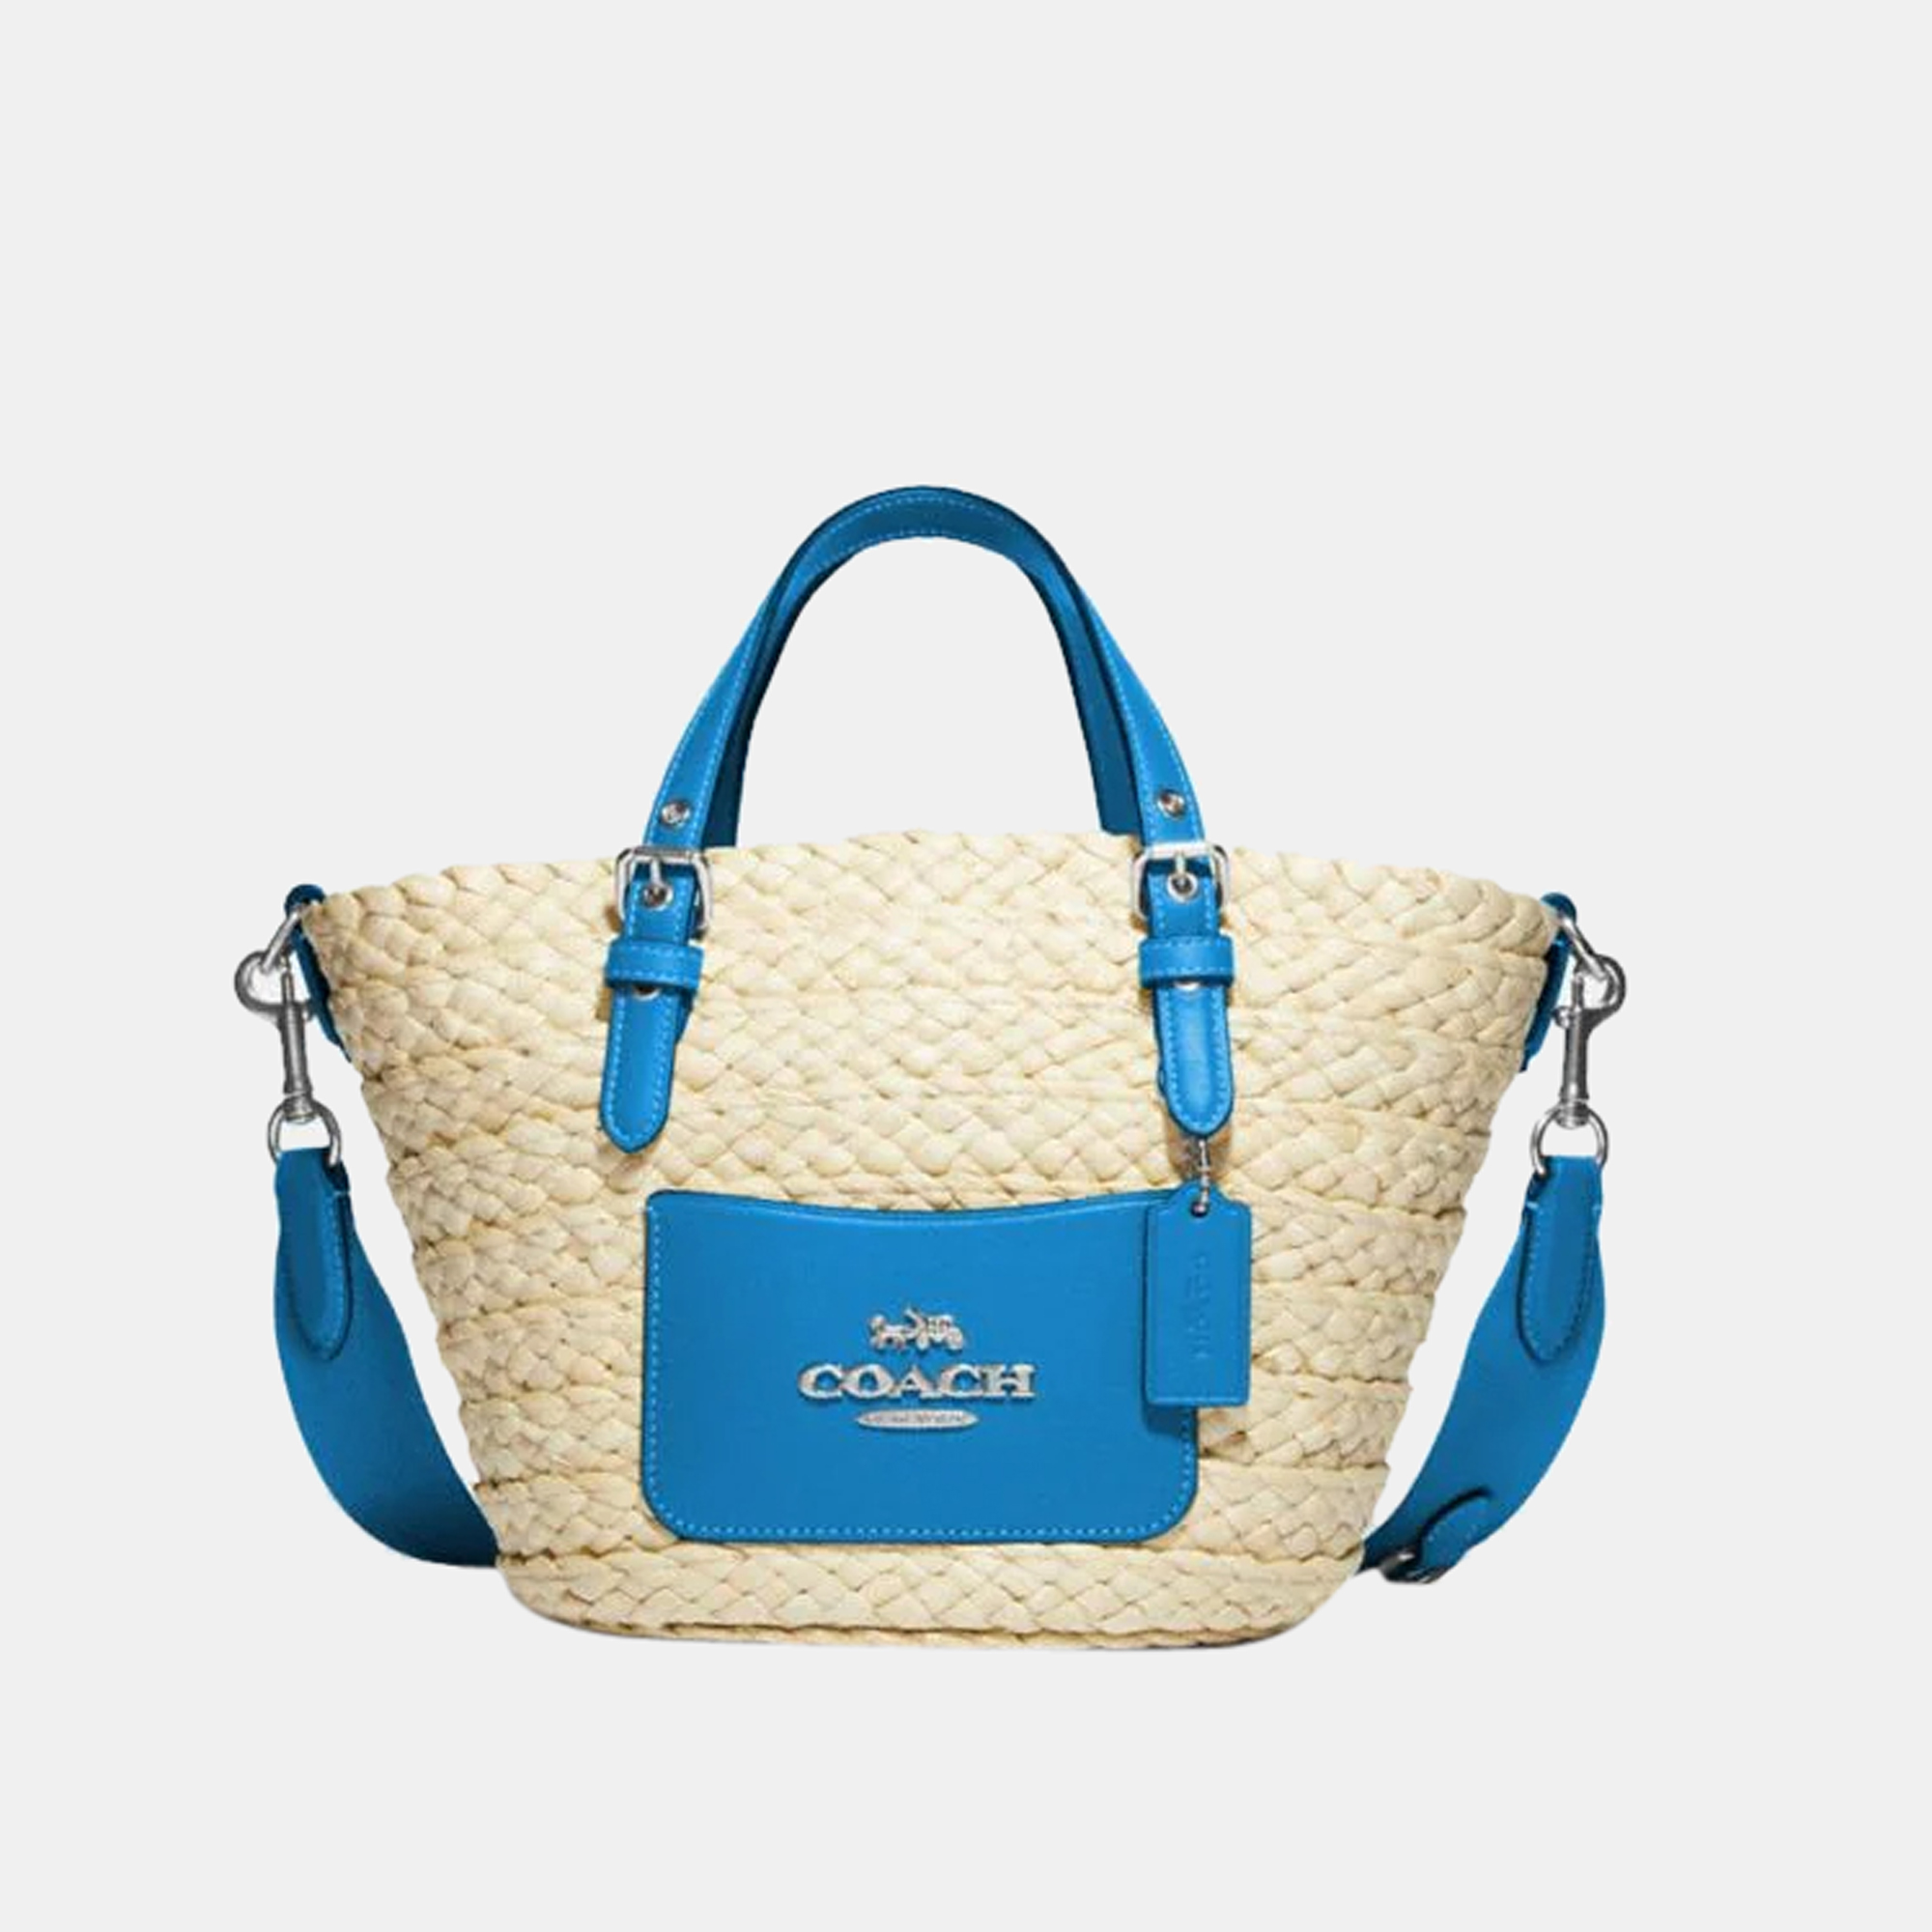 Coach Blue Straw & Leather Small Tote Bag